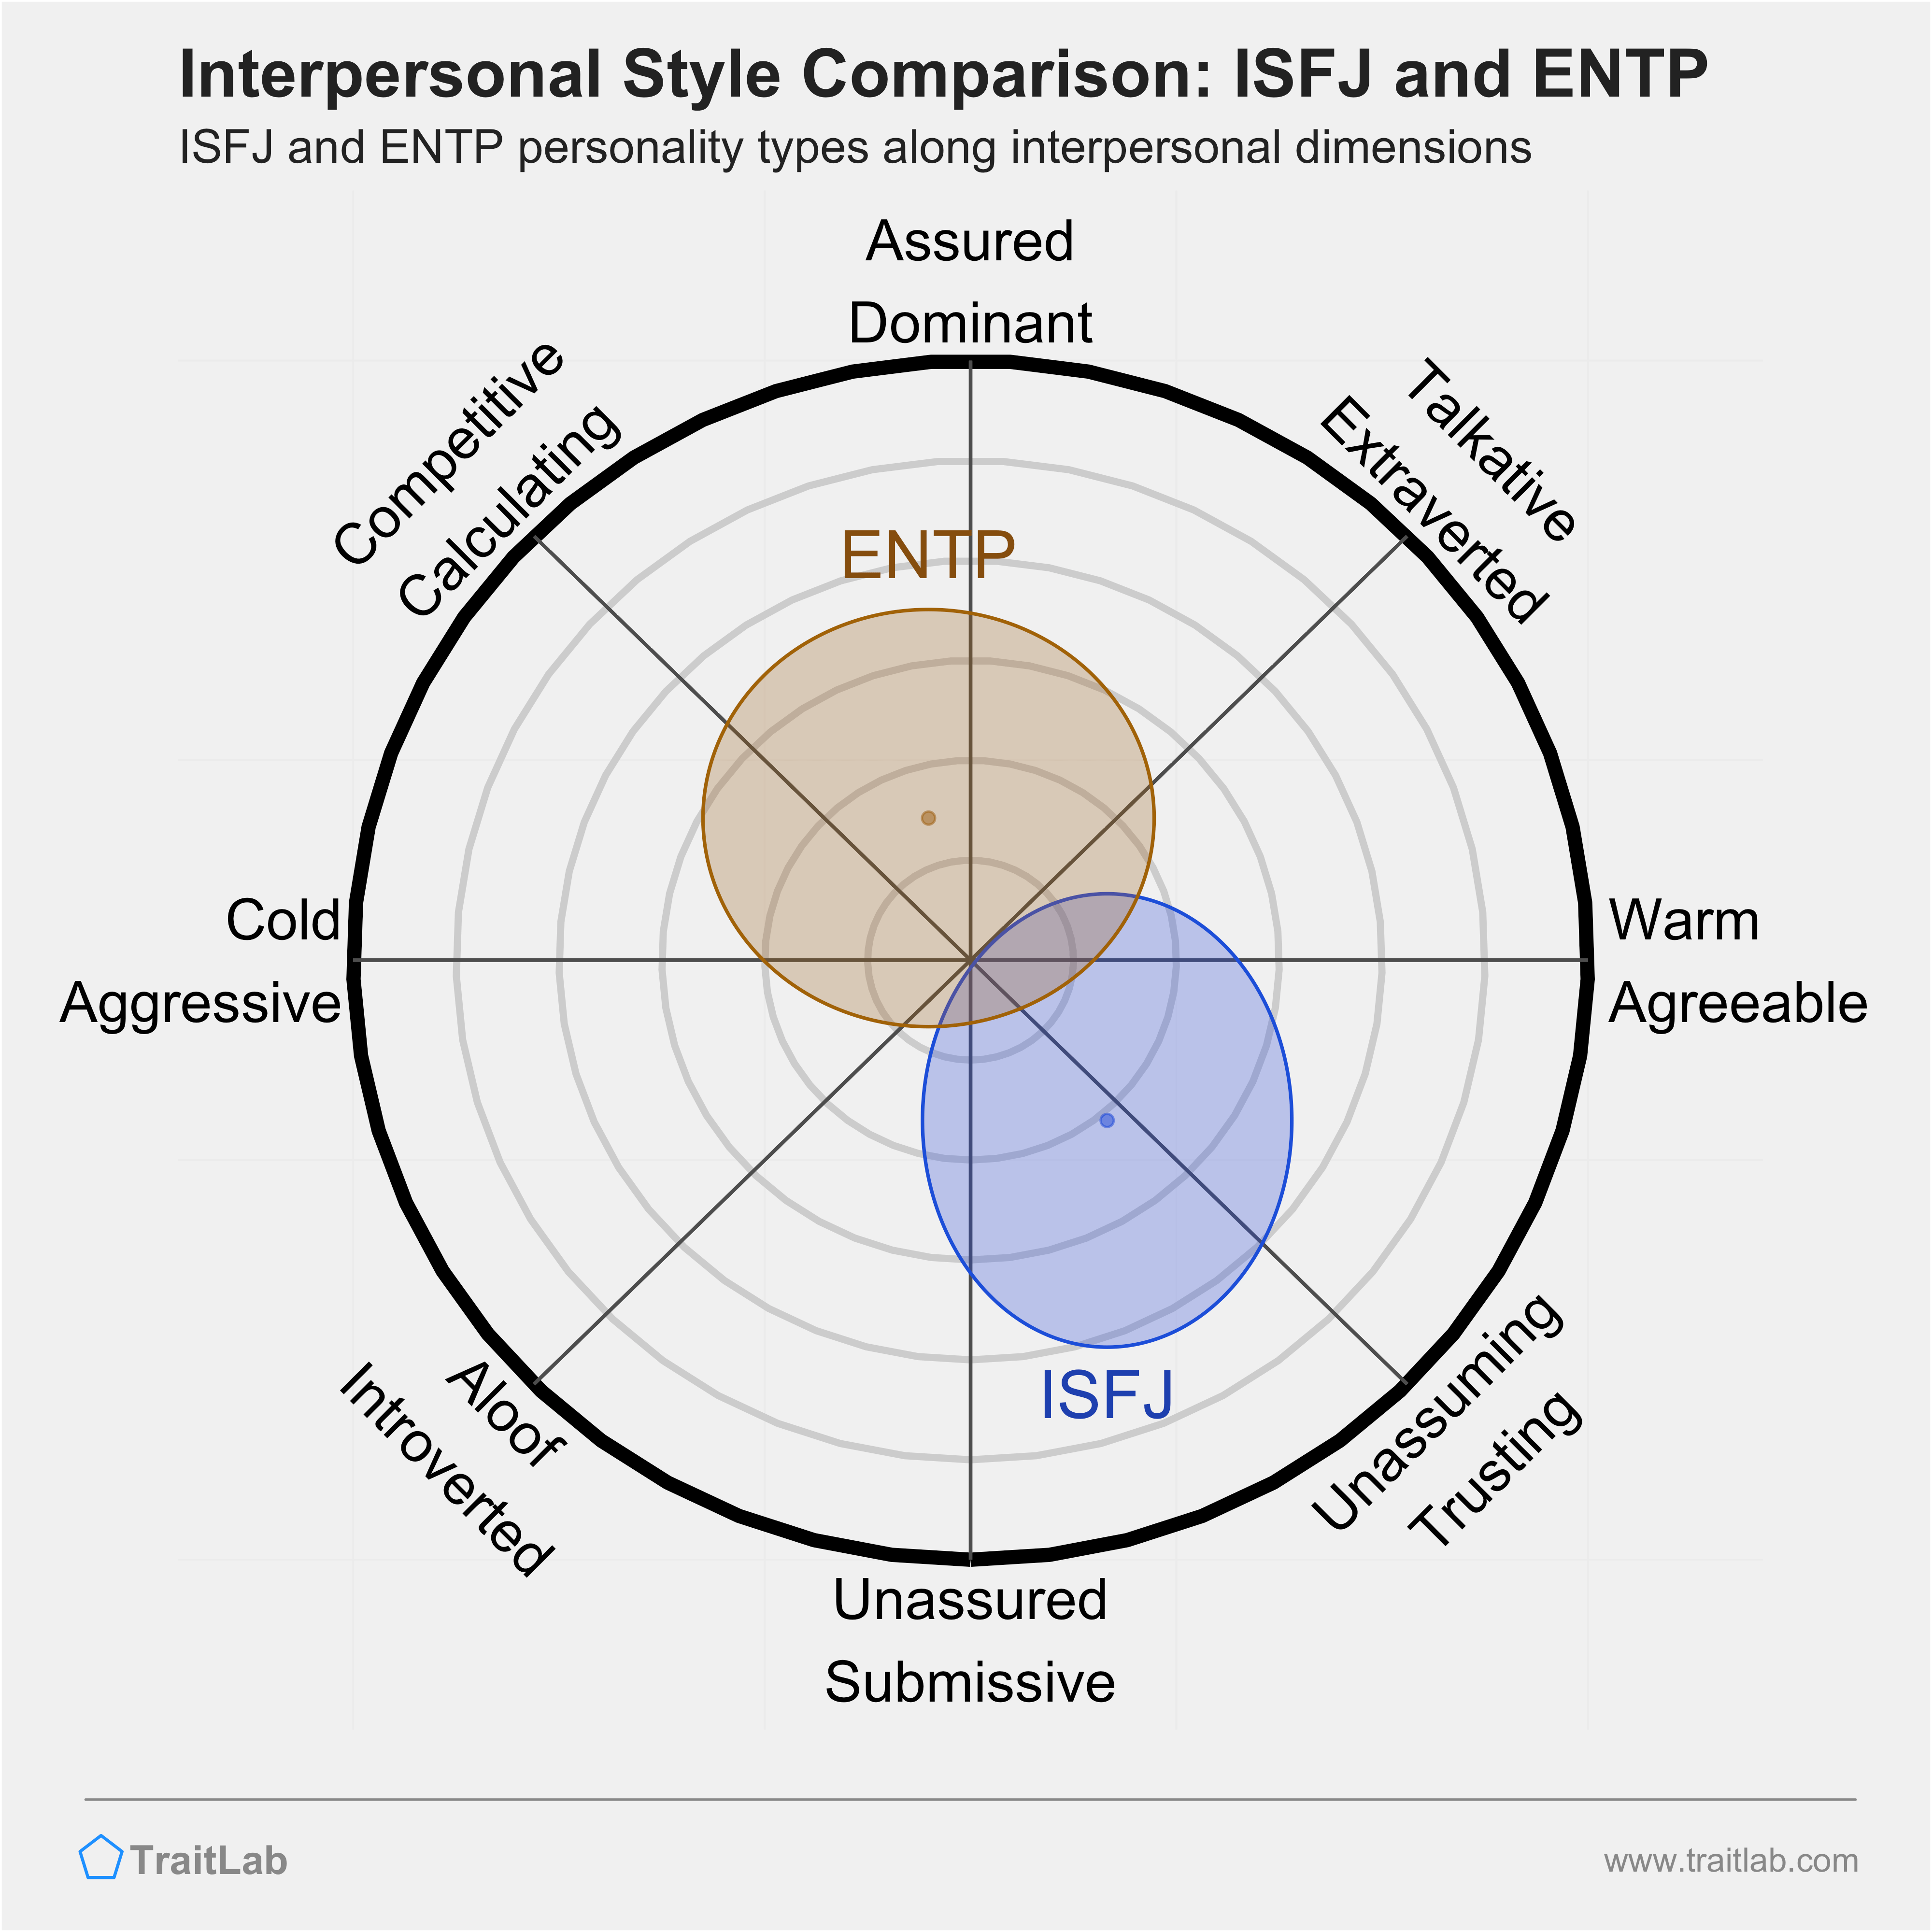 ISFJ and ENTP comparison across interpersonal dimensions